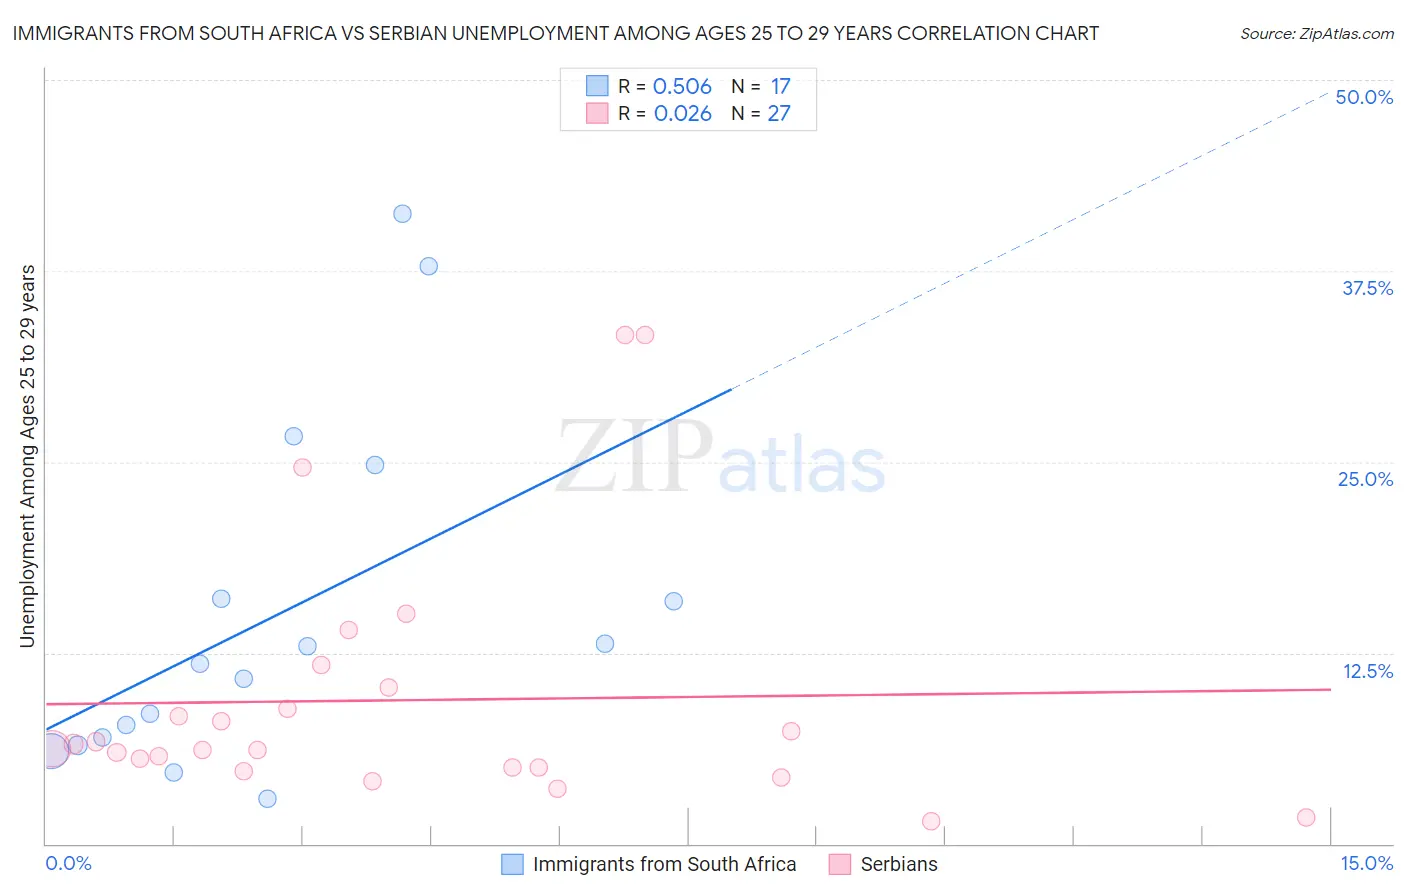 Immigrants from South Africa vs Serbian Unemployment Among Ages 25 to 29 years